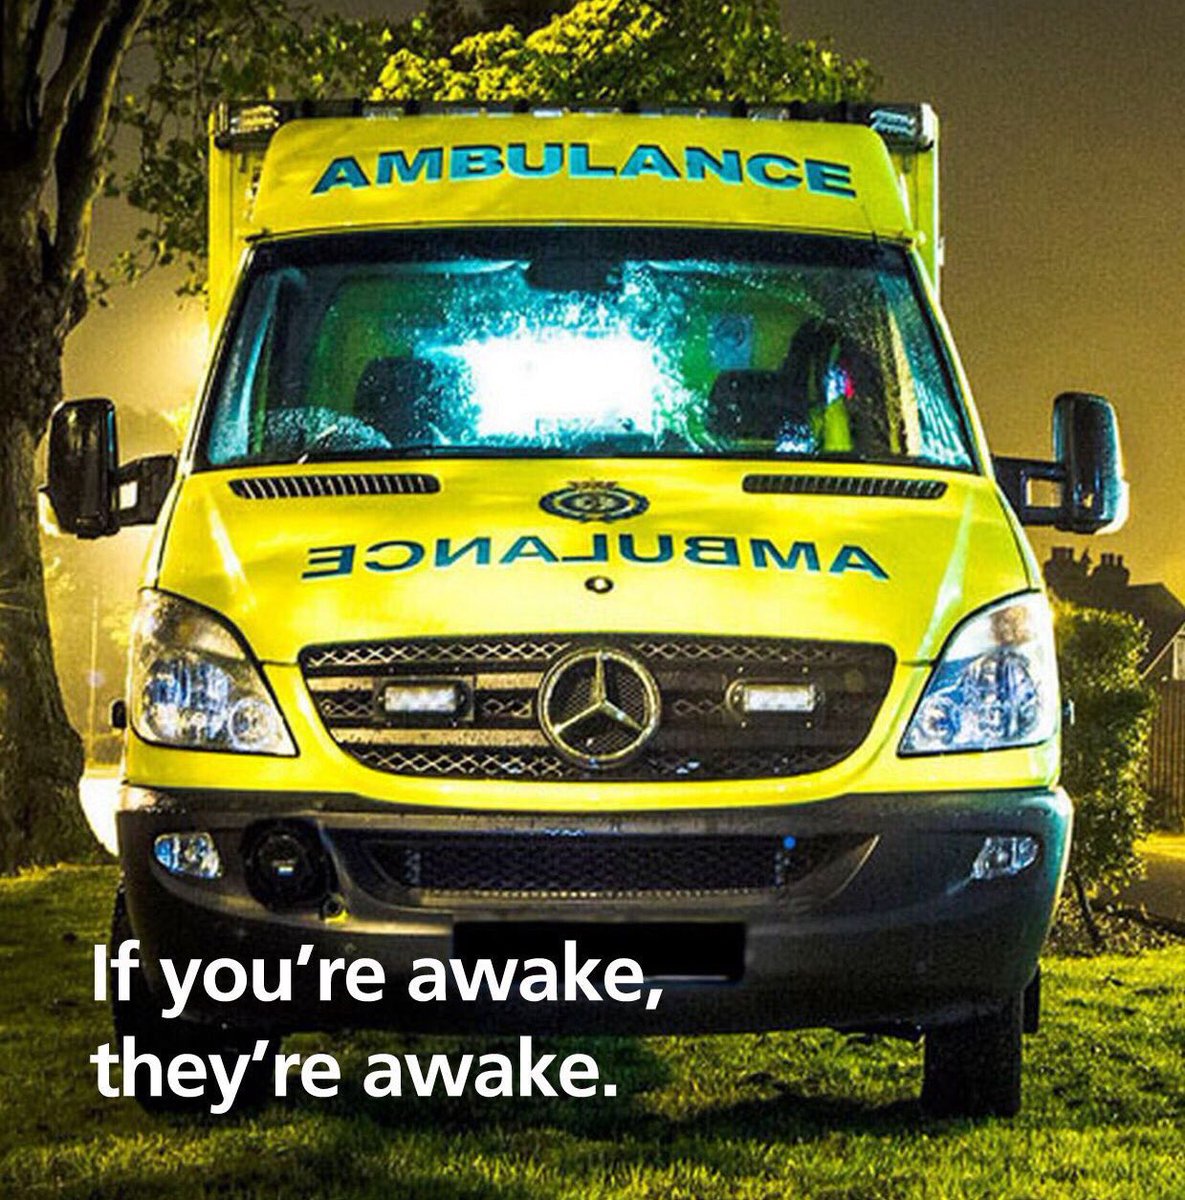 Please RT for all the paramedics and ambulance staff who are working tonight. We really could not be more grateful you are there.